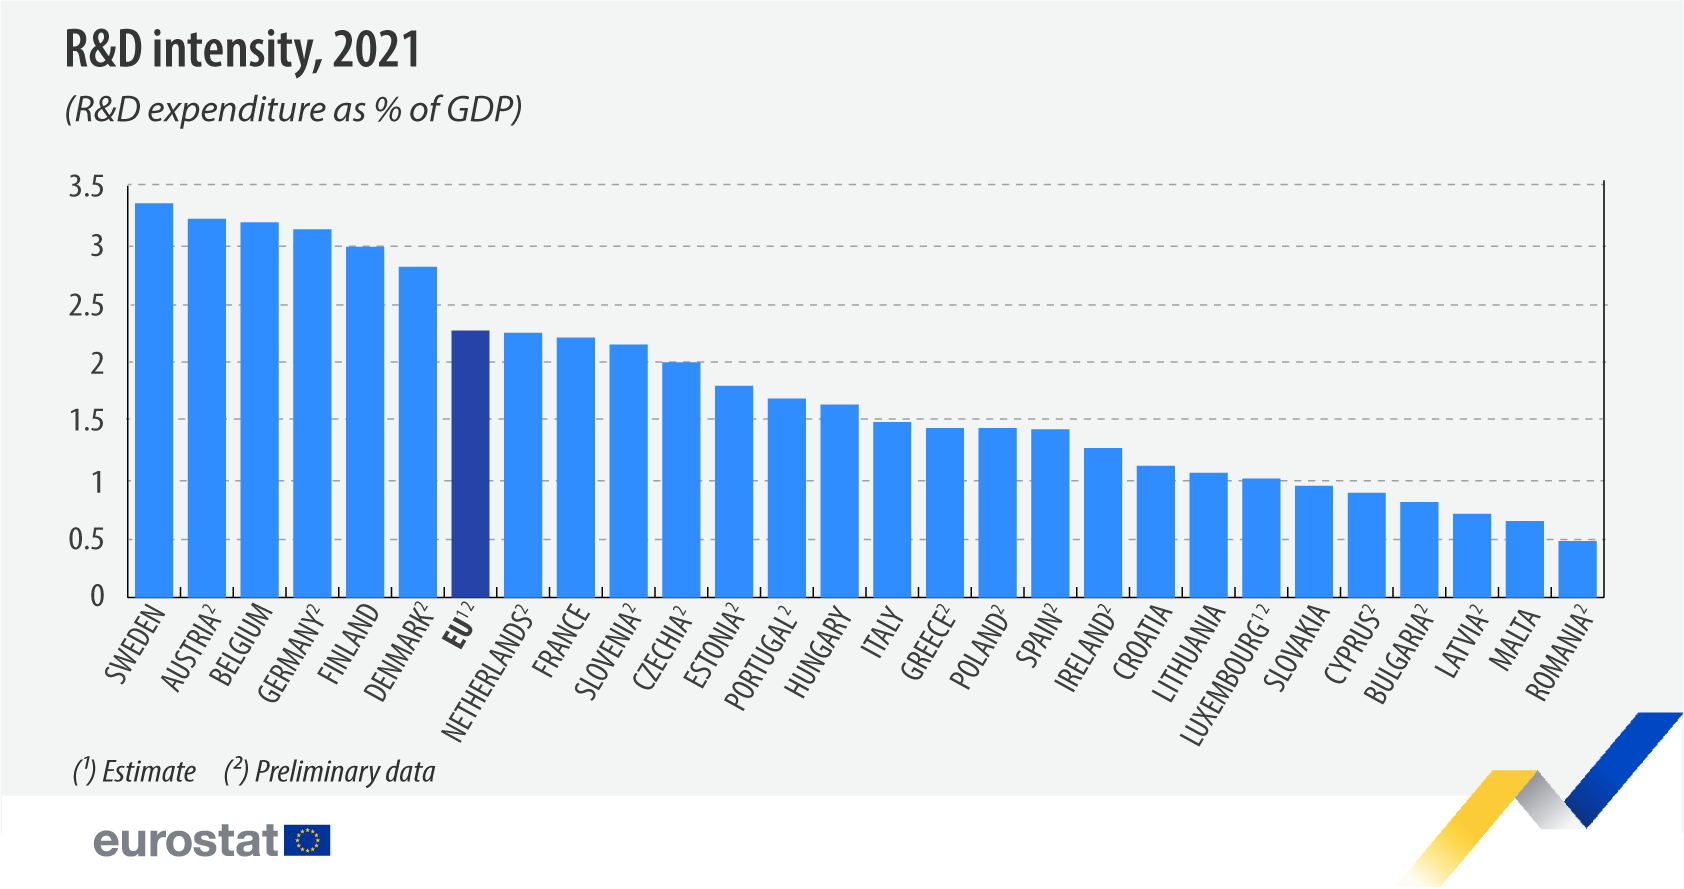 Bar chart: R&D intensity, expenditure as % of GDP, 2021